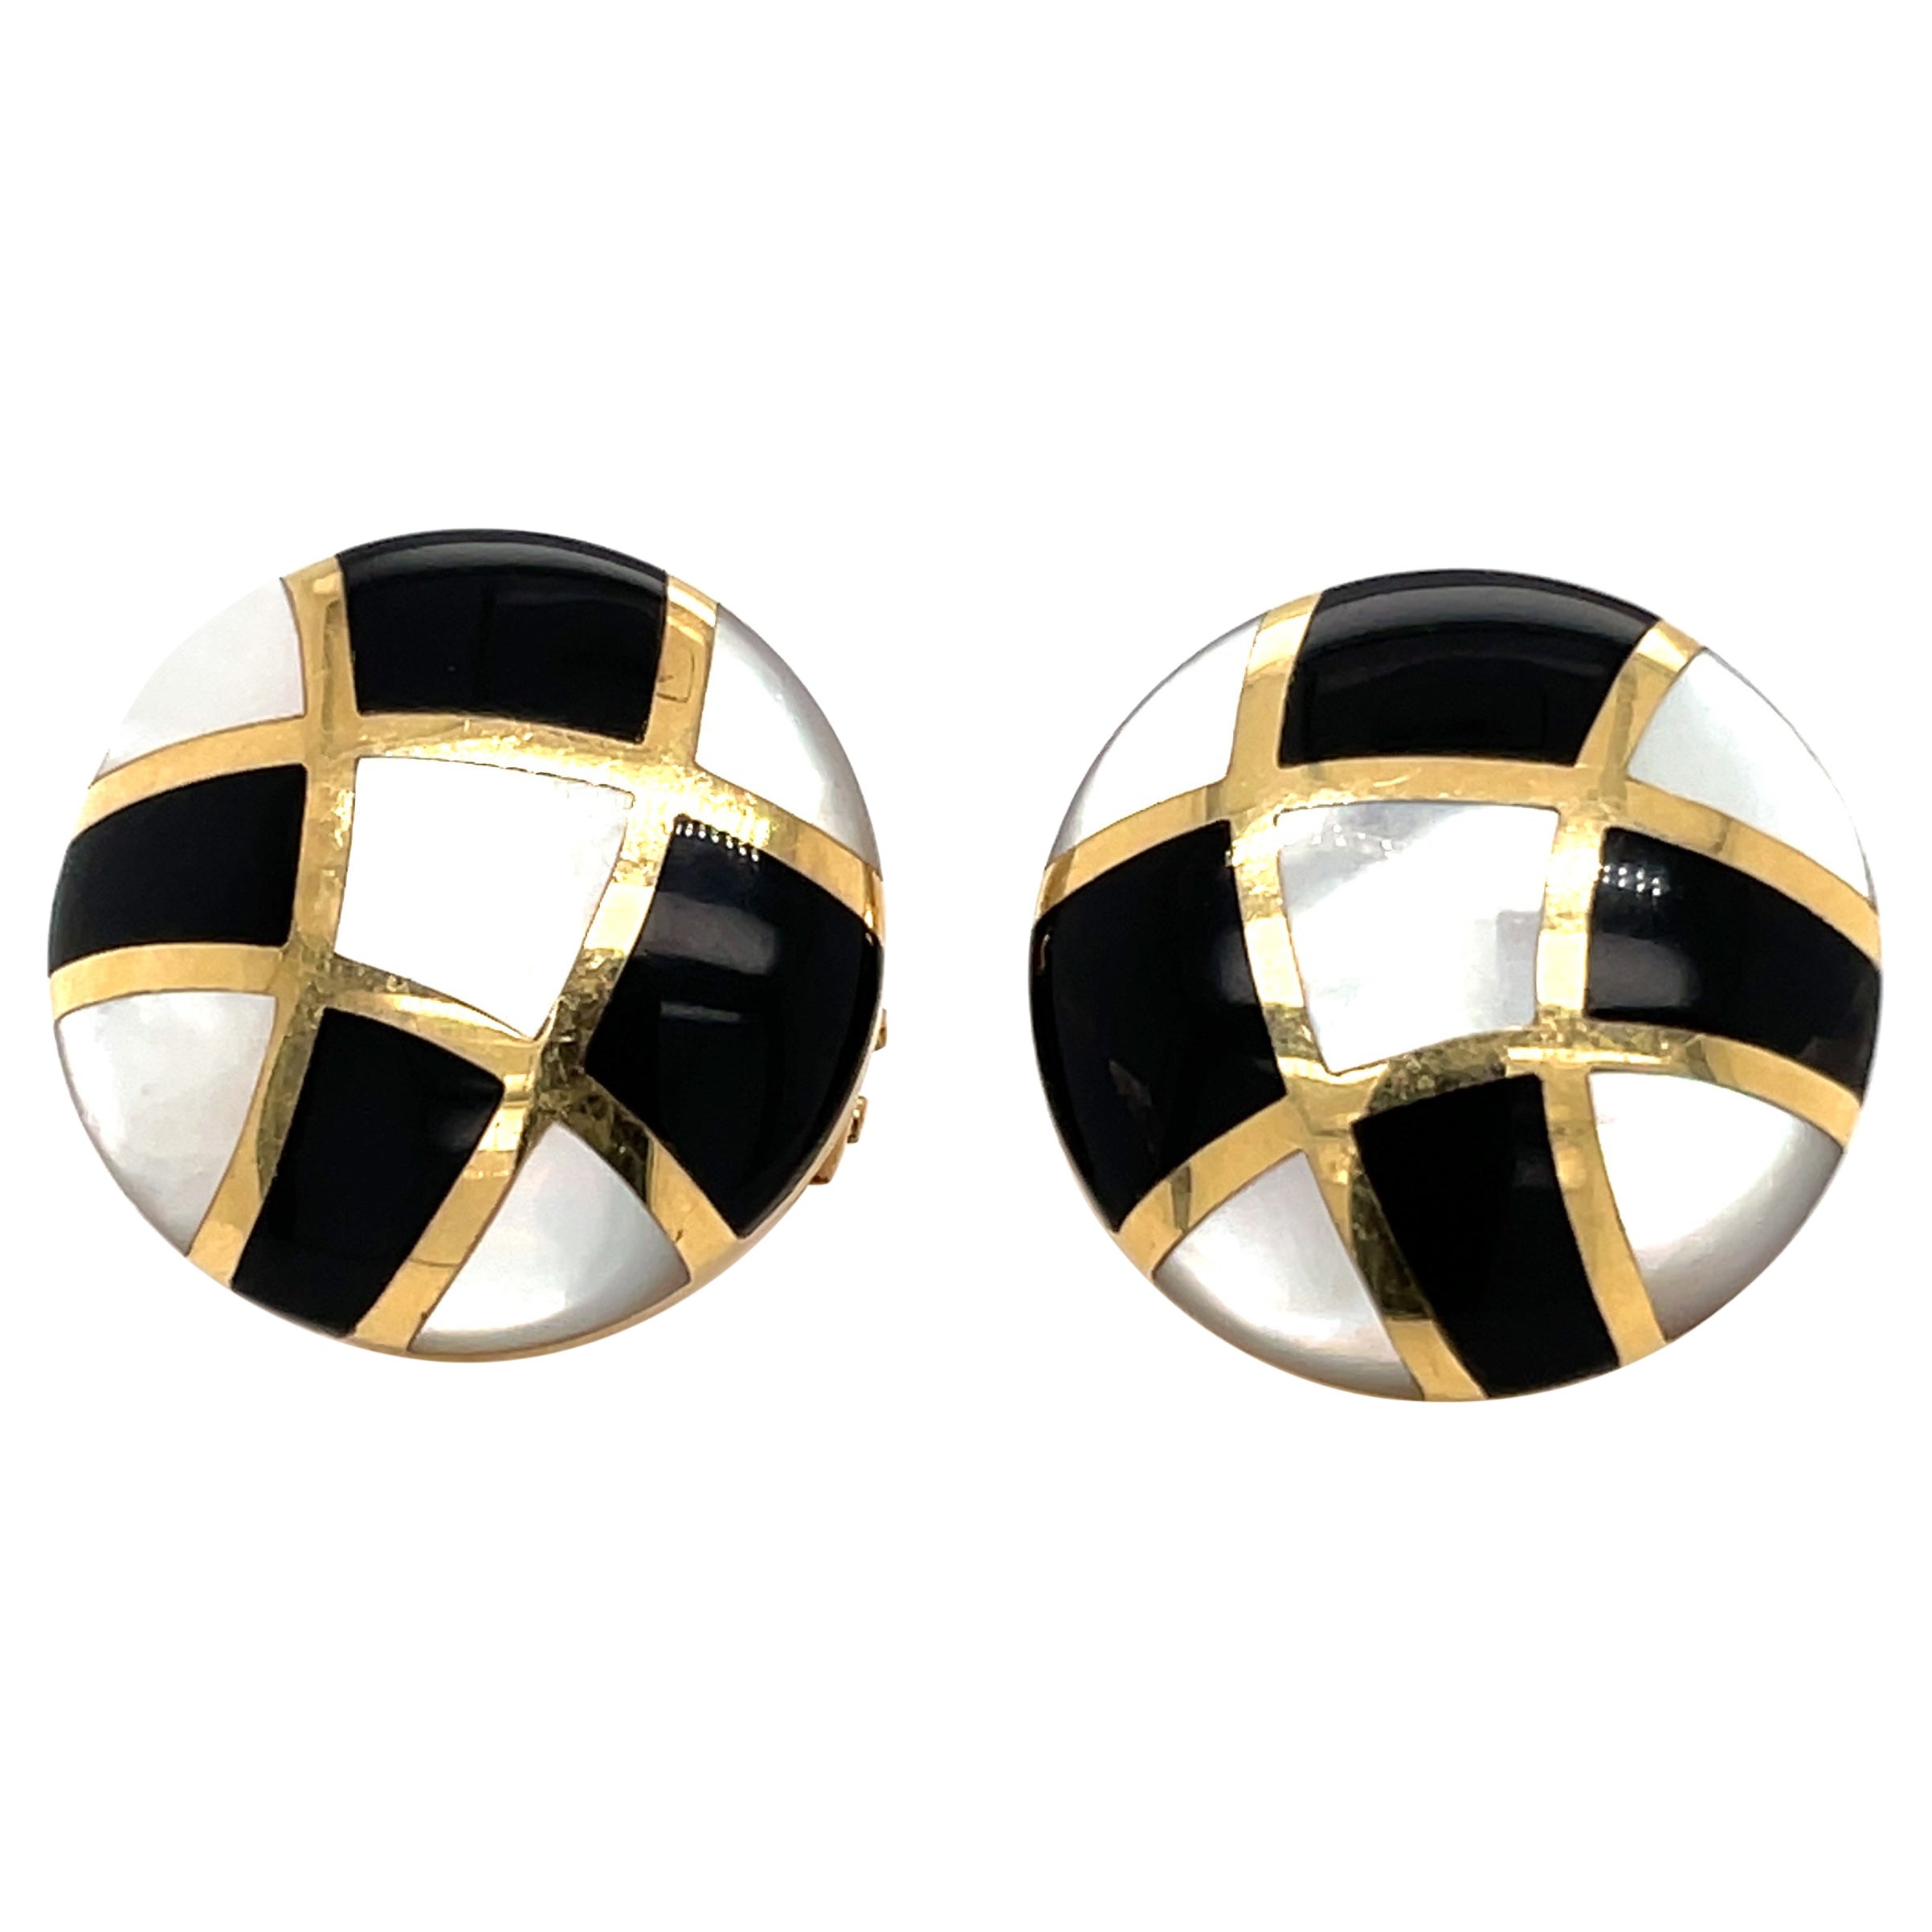 Asch Grossbardt White Gold Black and White Checkerboard Onyx MOP Earrings